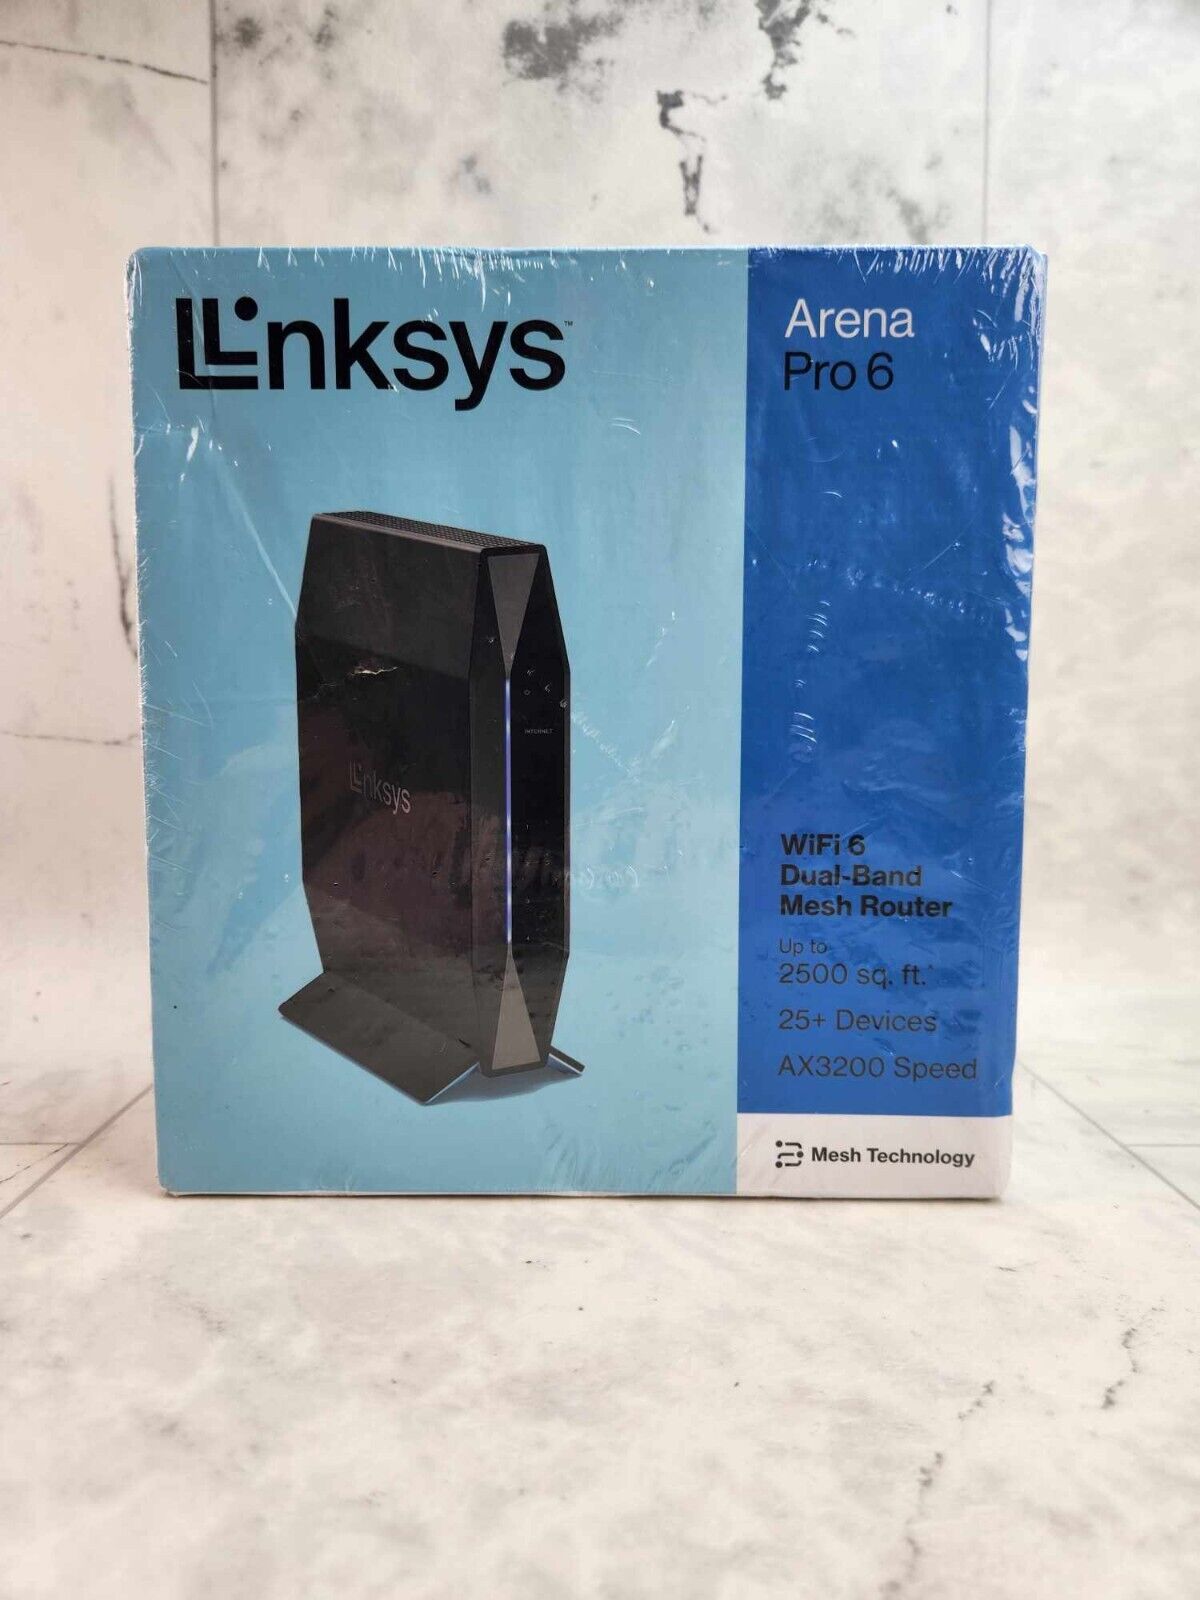 LINKSYS ARENA PRO 6 AX3200 WIFI 6 DUAL BANDMESH ROUTER 2500 SQ FT BRAND NEW